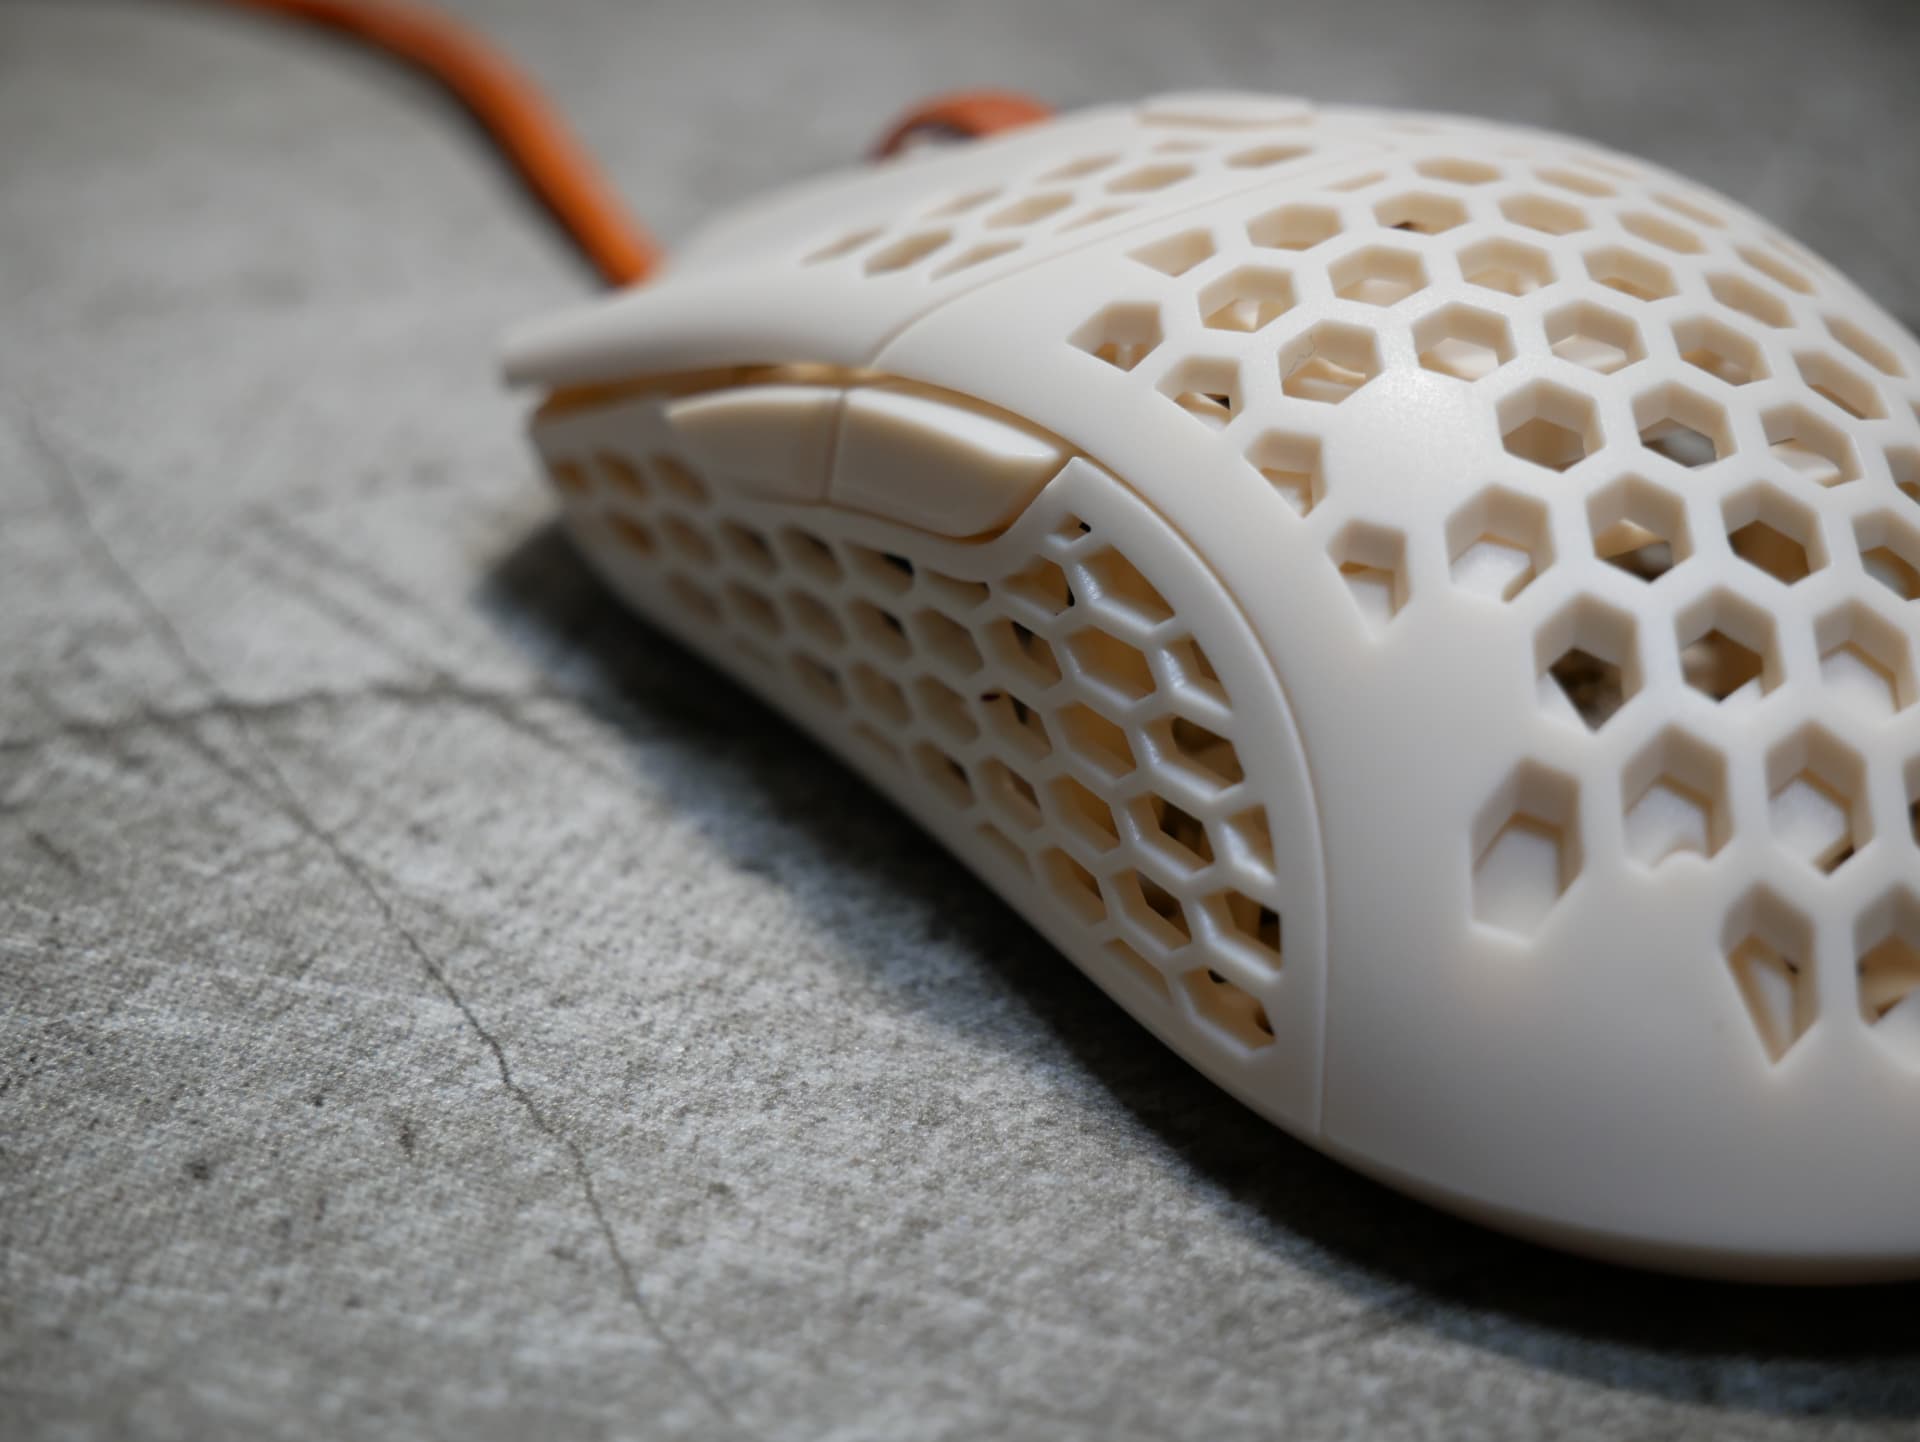 finalmouse ultralight2-capetown + α